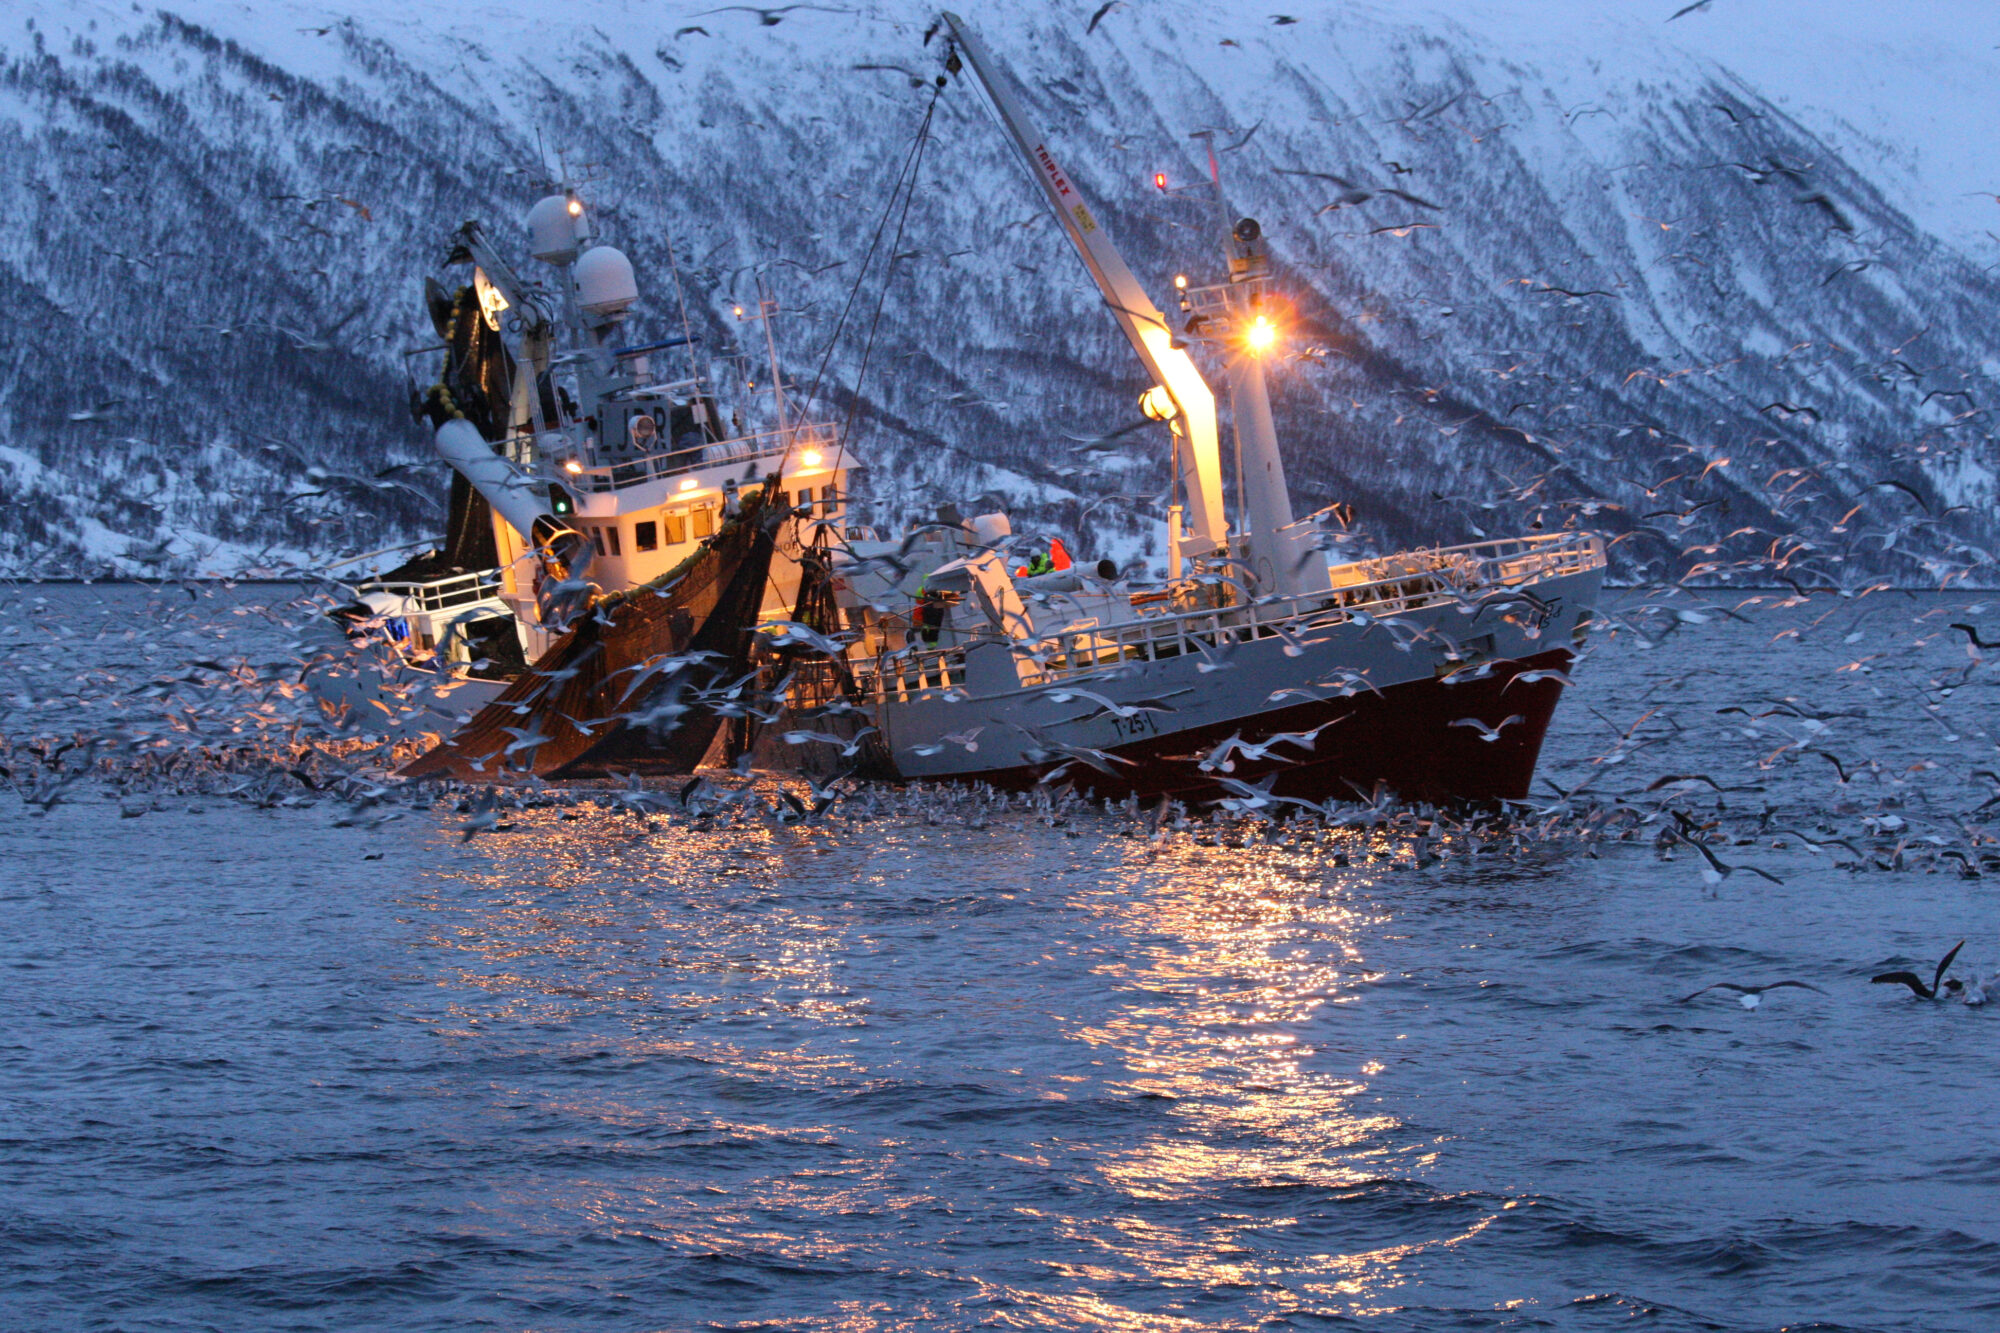 If we can't untangle this mess, Norway's blue industry will never